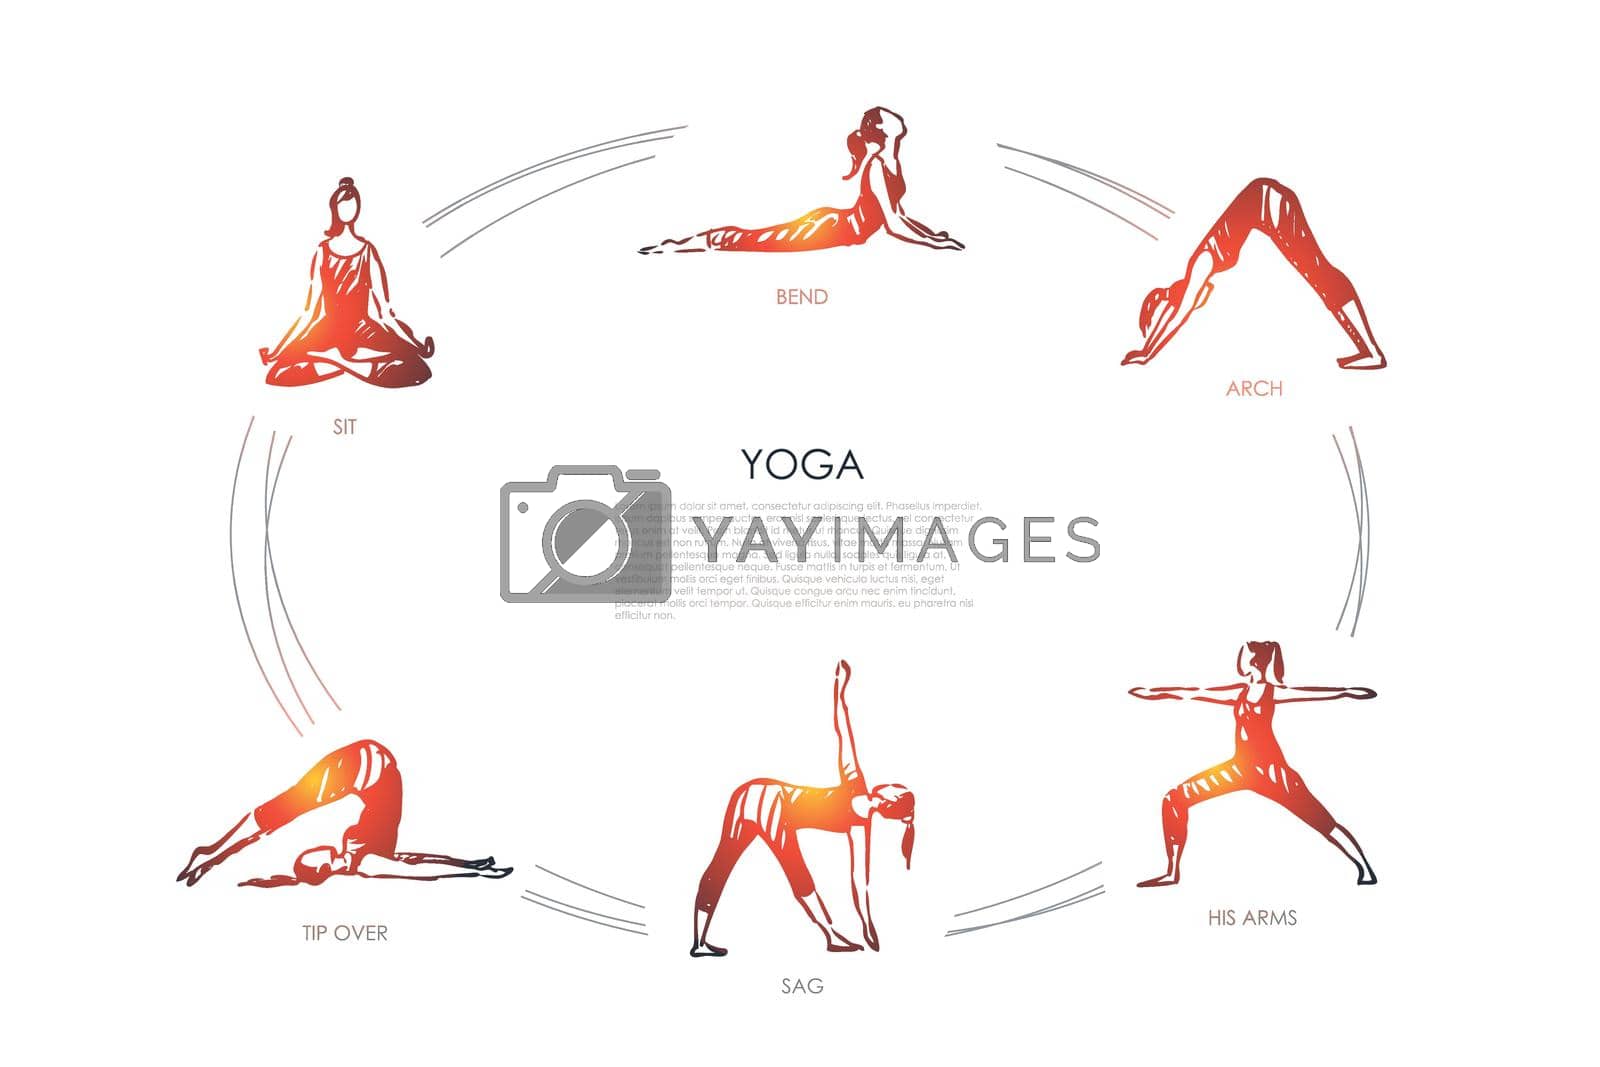 Royalty free image of Yoga - sit, bend, arch, his arms, sag, tip over vector concept set by Vasilyeva